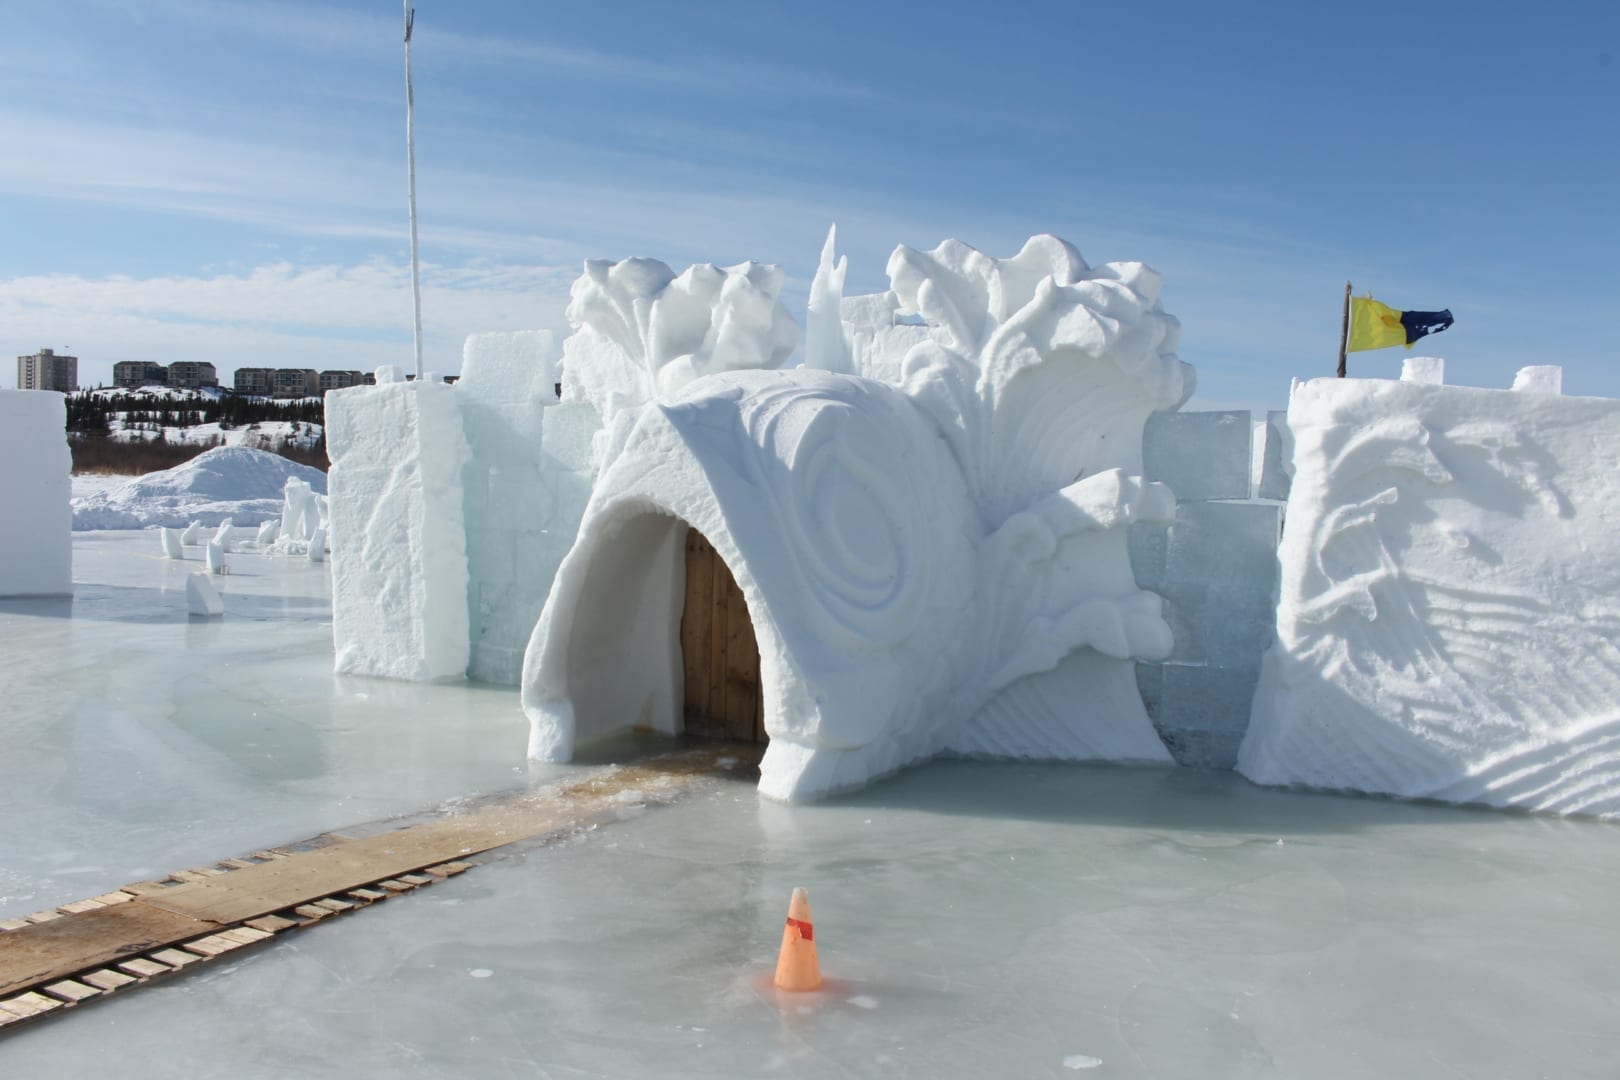 As the warm weather has caused the Snowking castle to melt and the entrance to sink 'Under the Sea', the festival will be closed for the remainder of the year, one week earlier than usual. Brett McGarry/NNSL